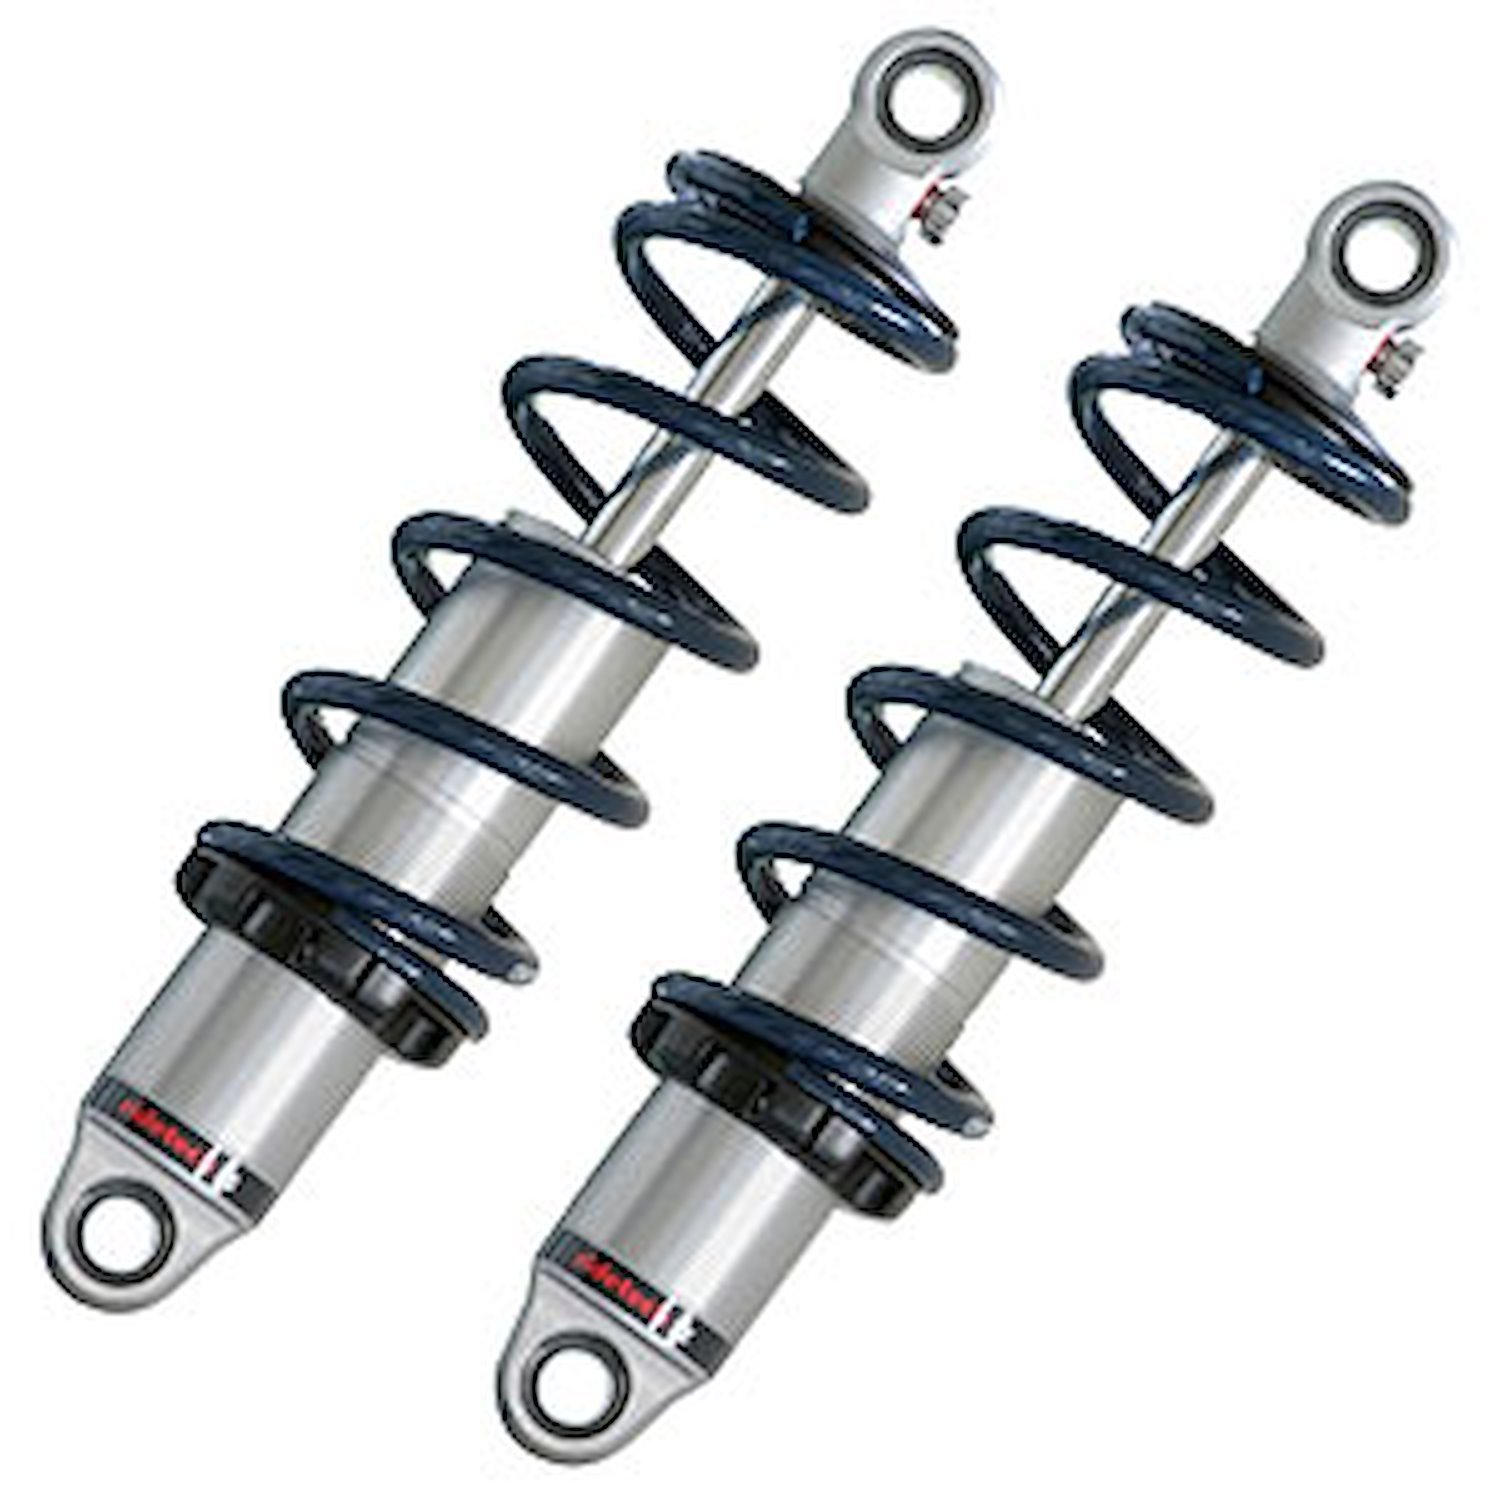 HQ Series Single-Adjustable Rear Coil-Over Shocks 1955-1957 Chevy